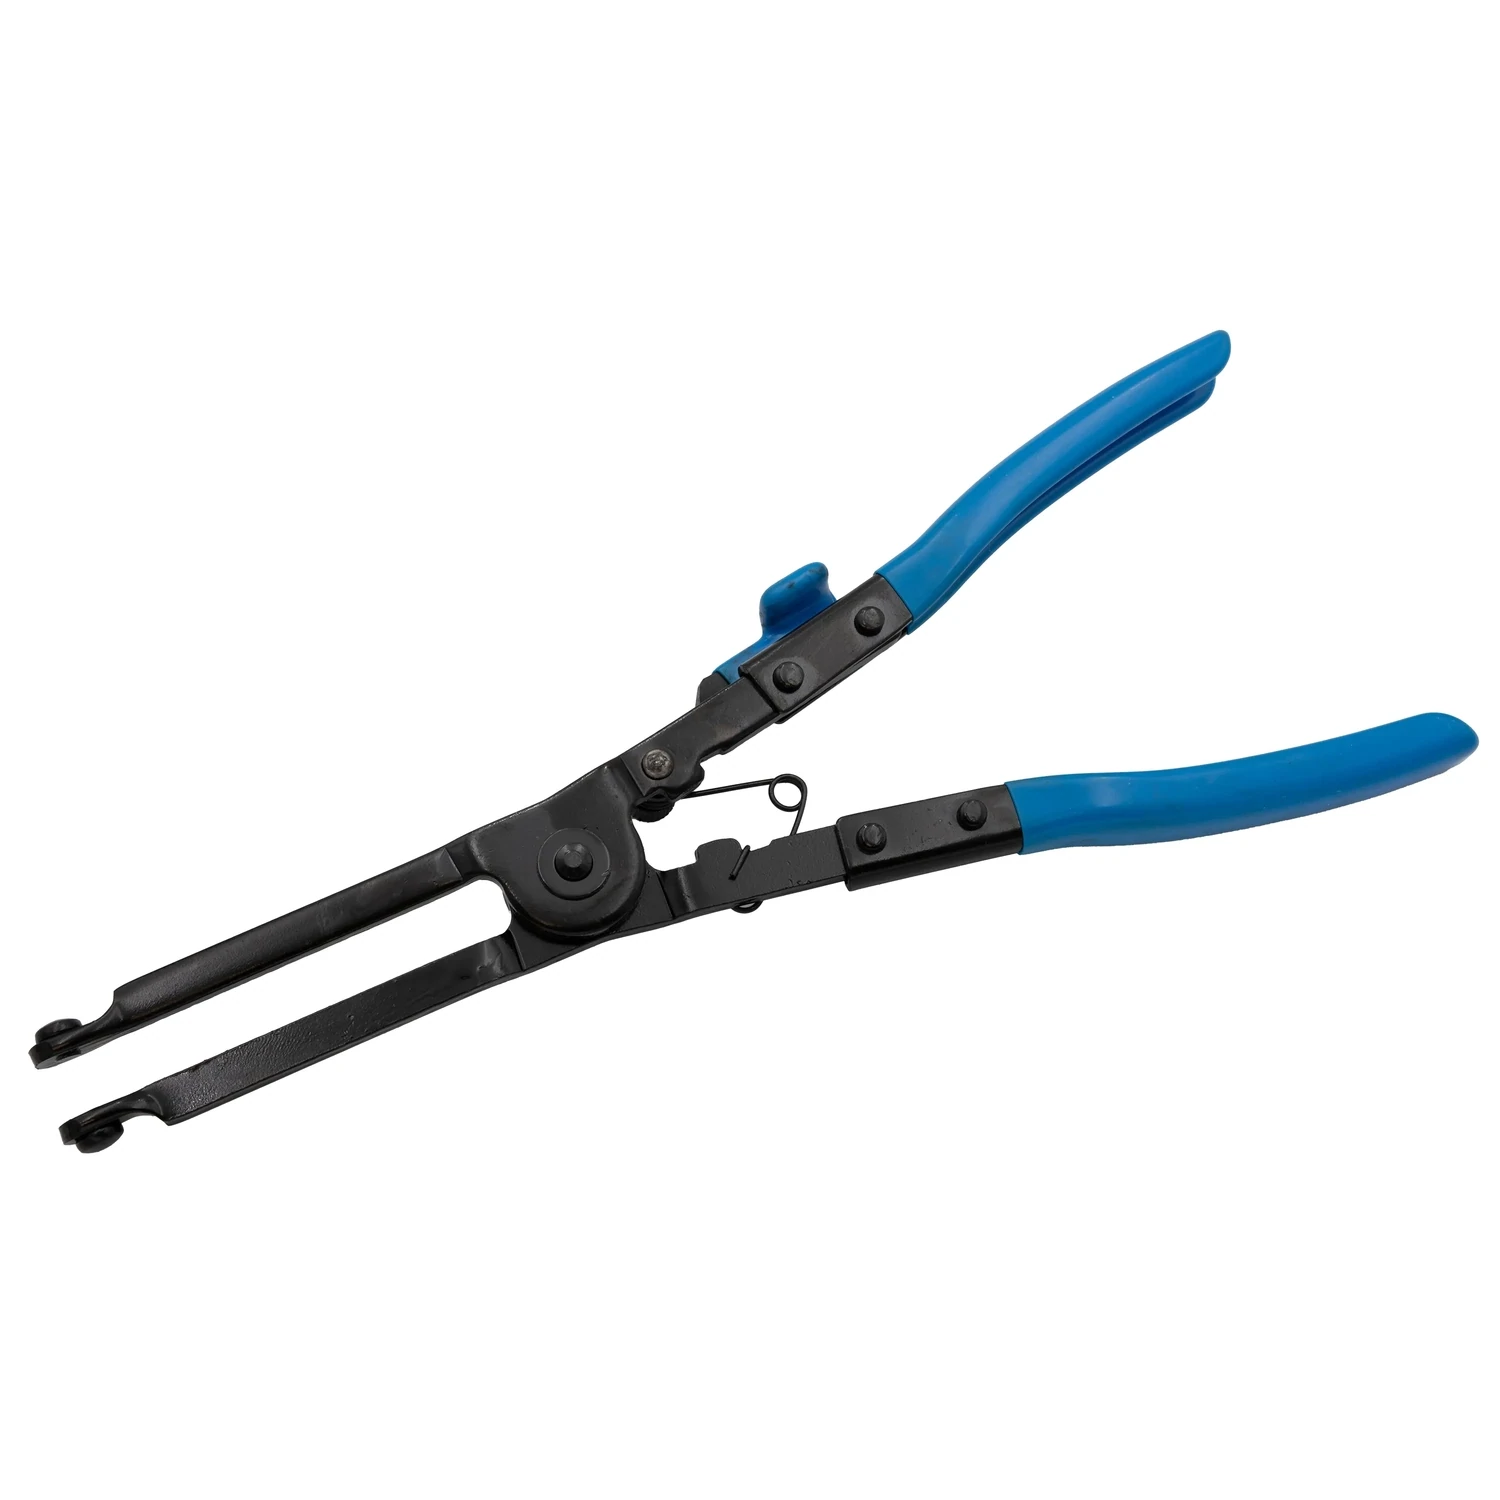 EXTRA LONG EXHAUST SPRING CLAMP PLIER MAGMA